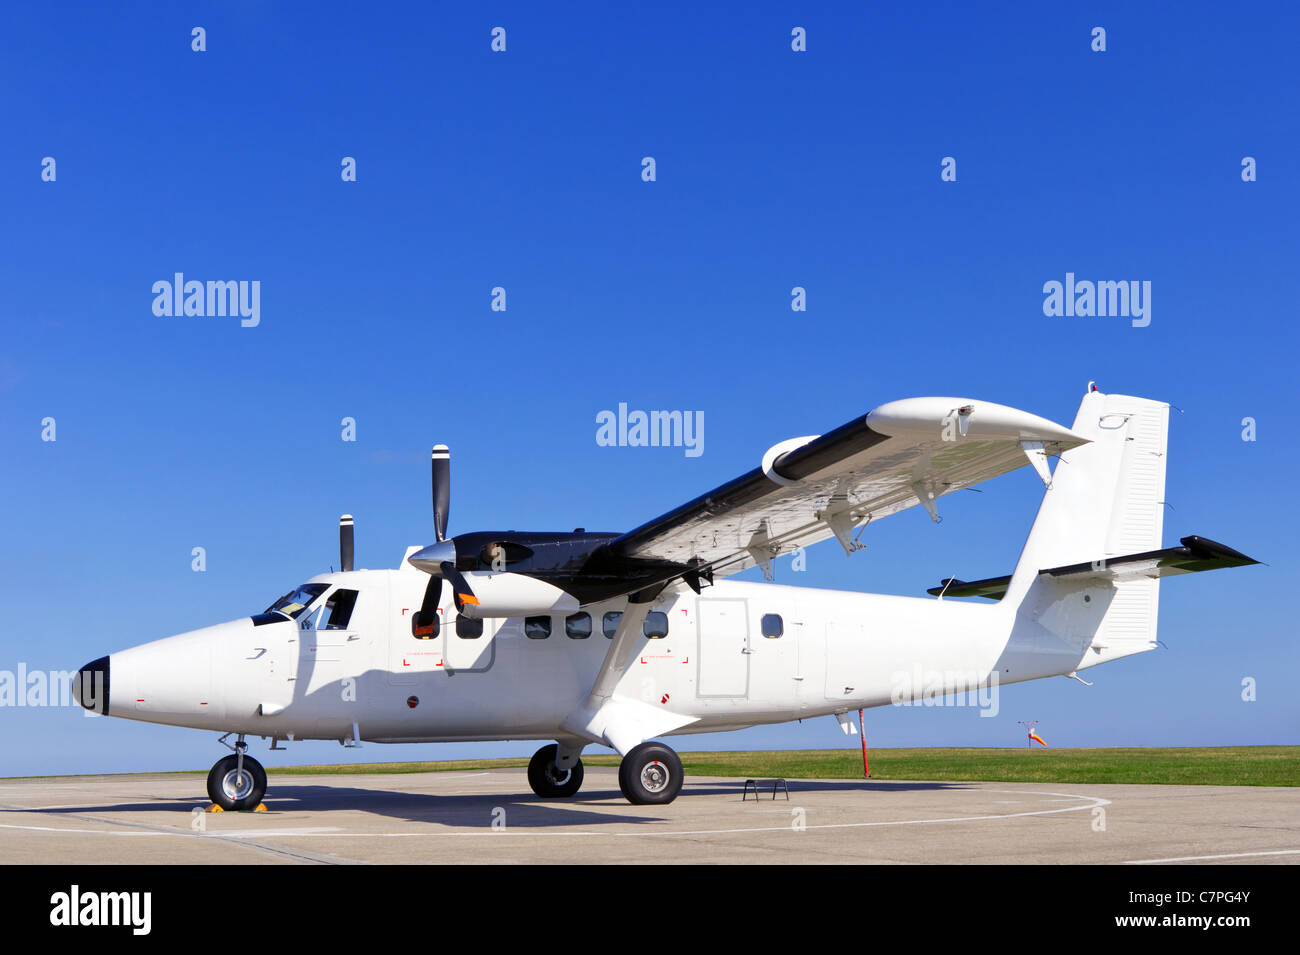 Photo of a twin propeller aircraft stationary on the runway on a bright sunny day with clear blue sky. Stock Photo